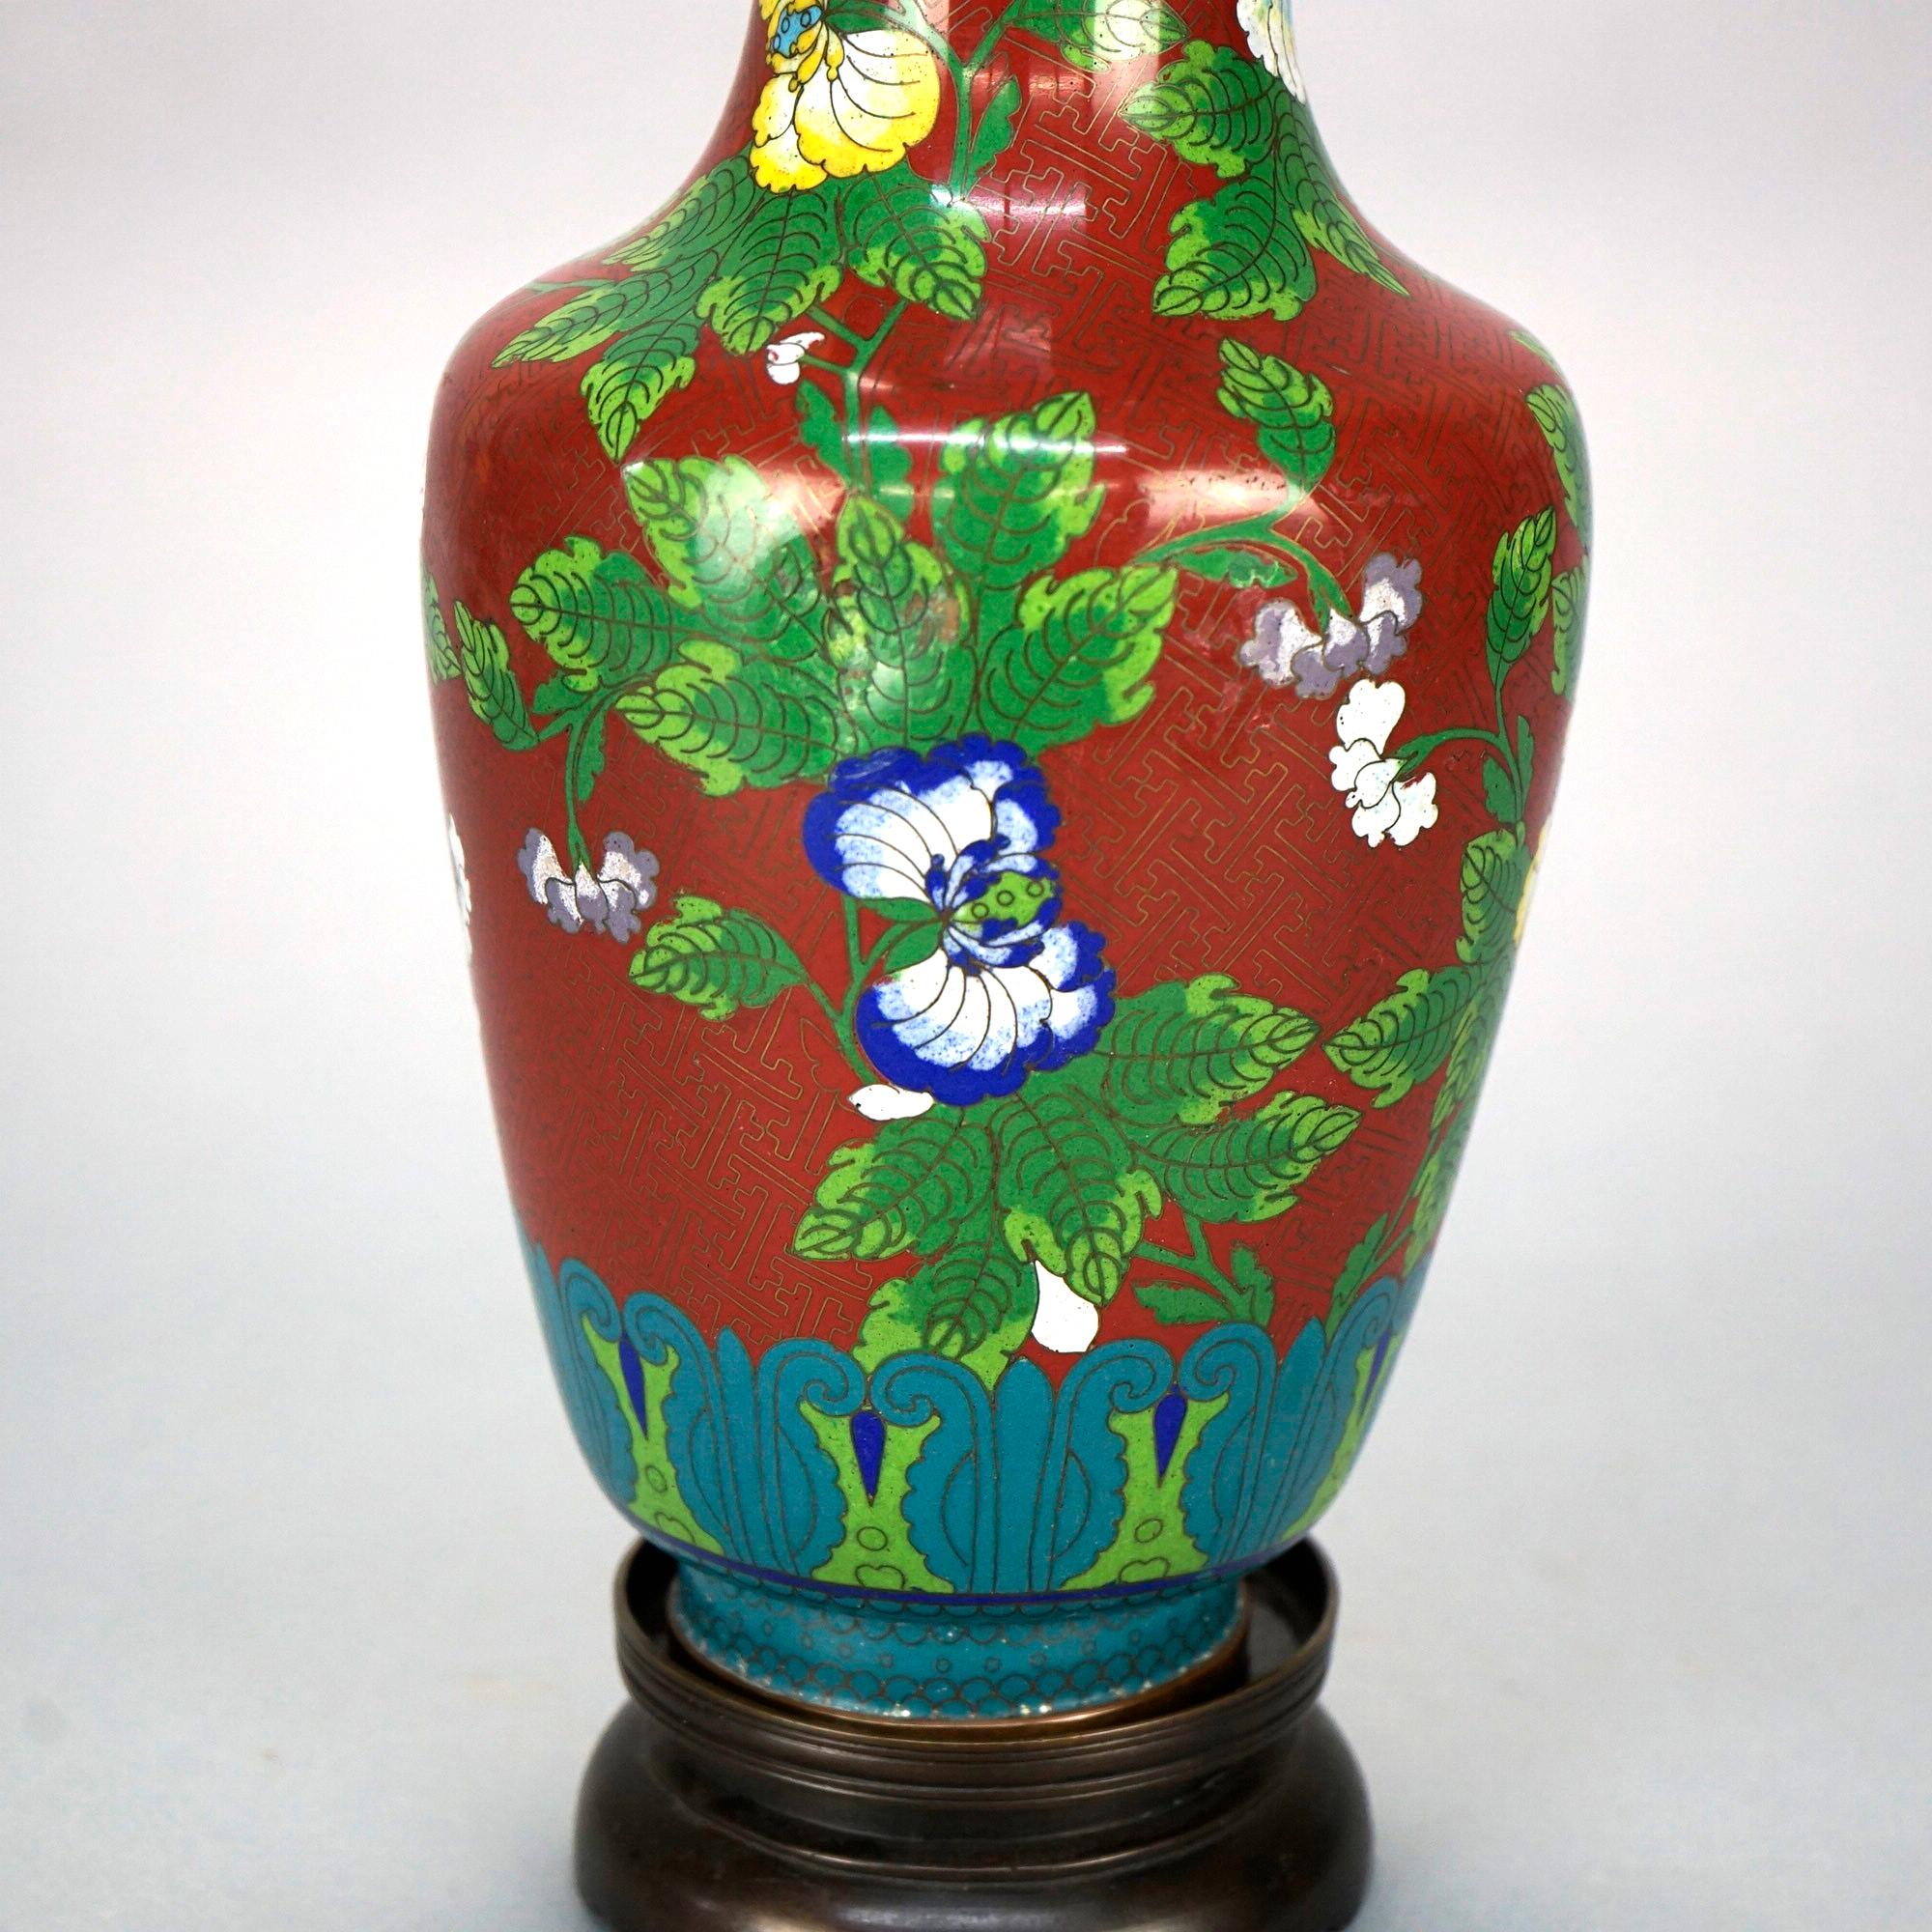 20th Century Antique Chinese Cloissone Enameled Vase with Bronze Base, Garden Themed, c1900 For Sale